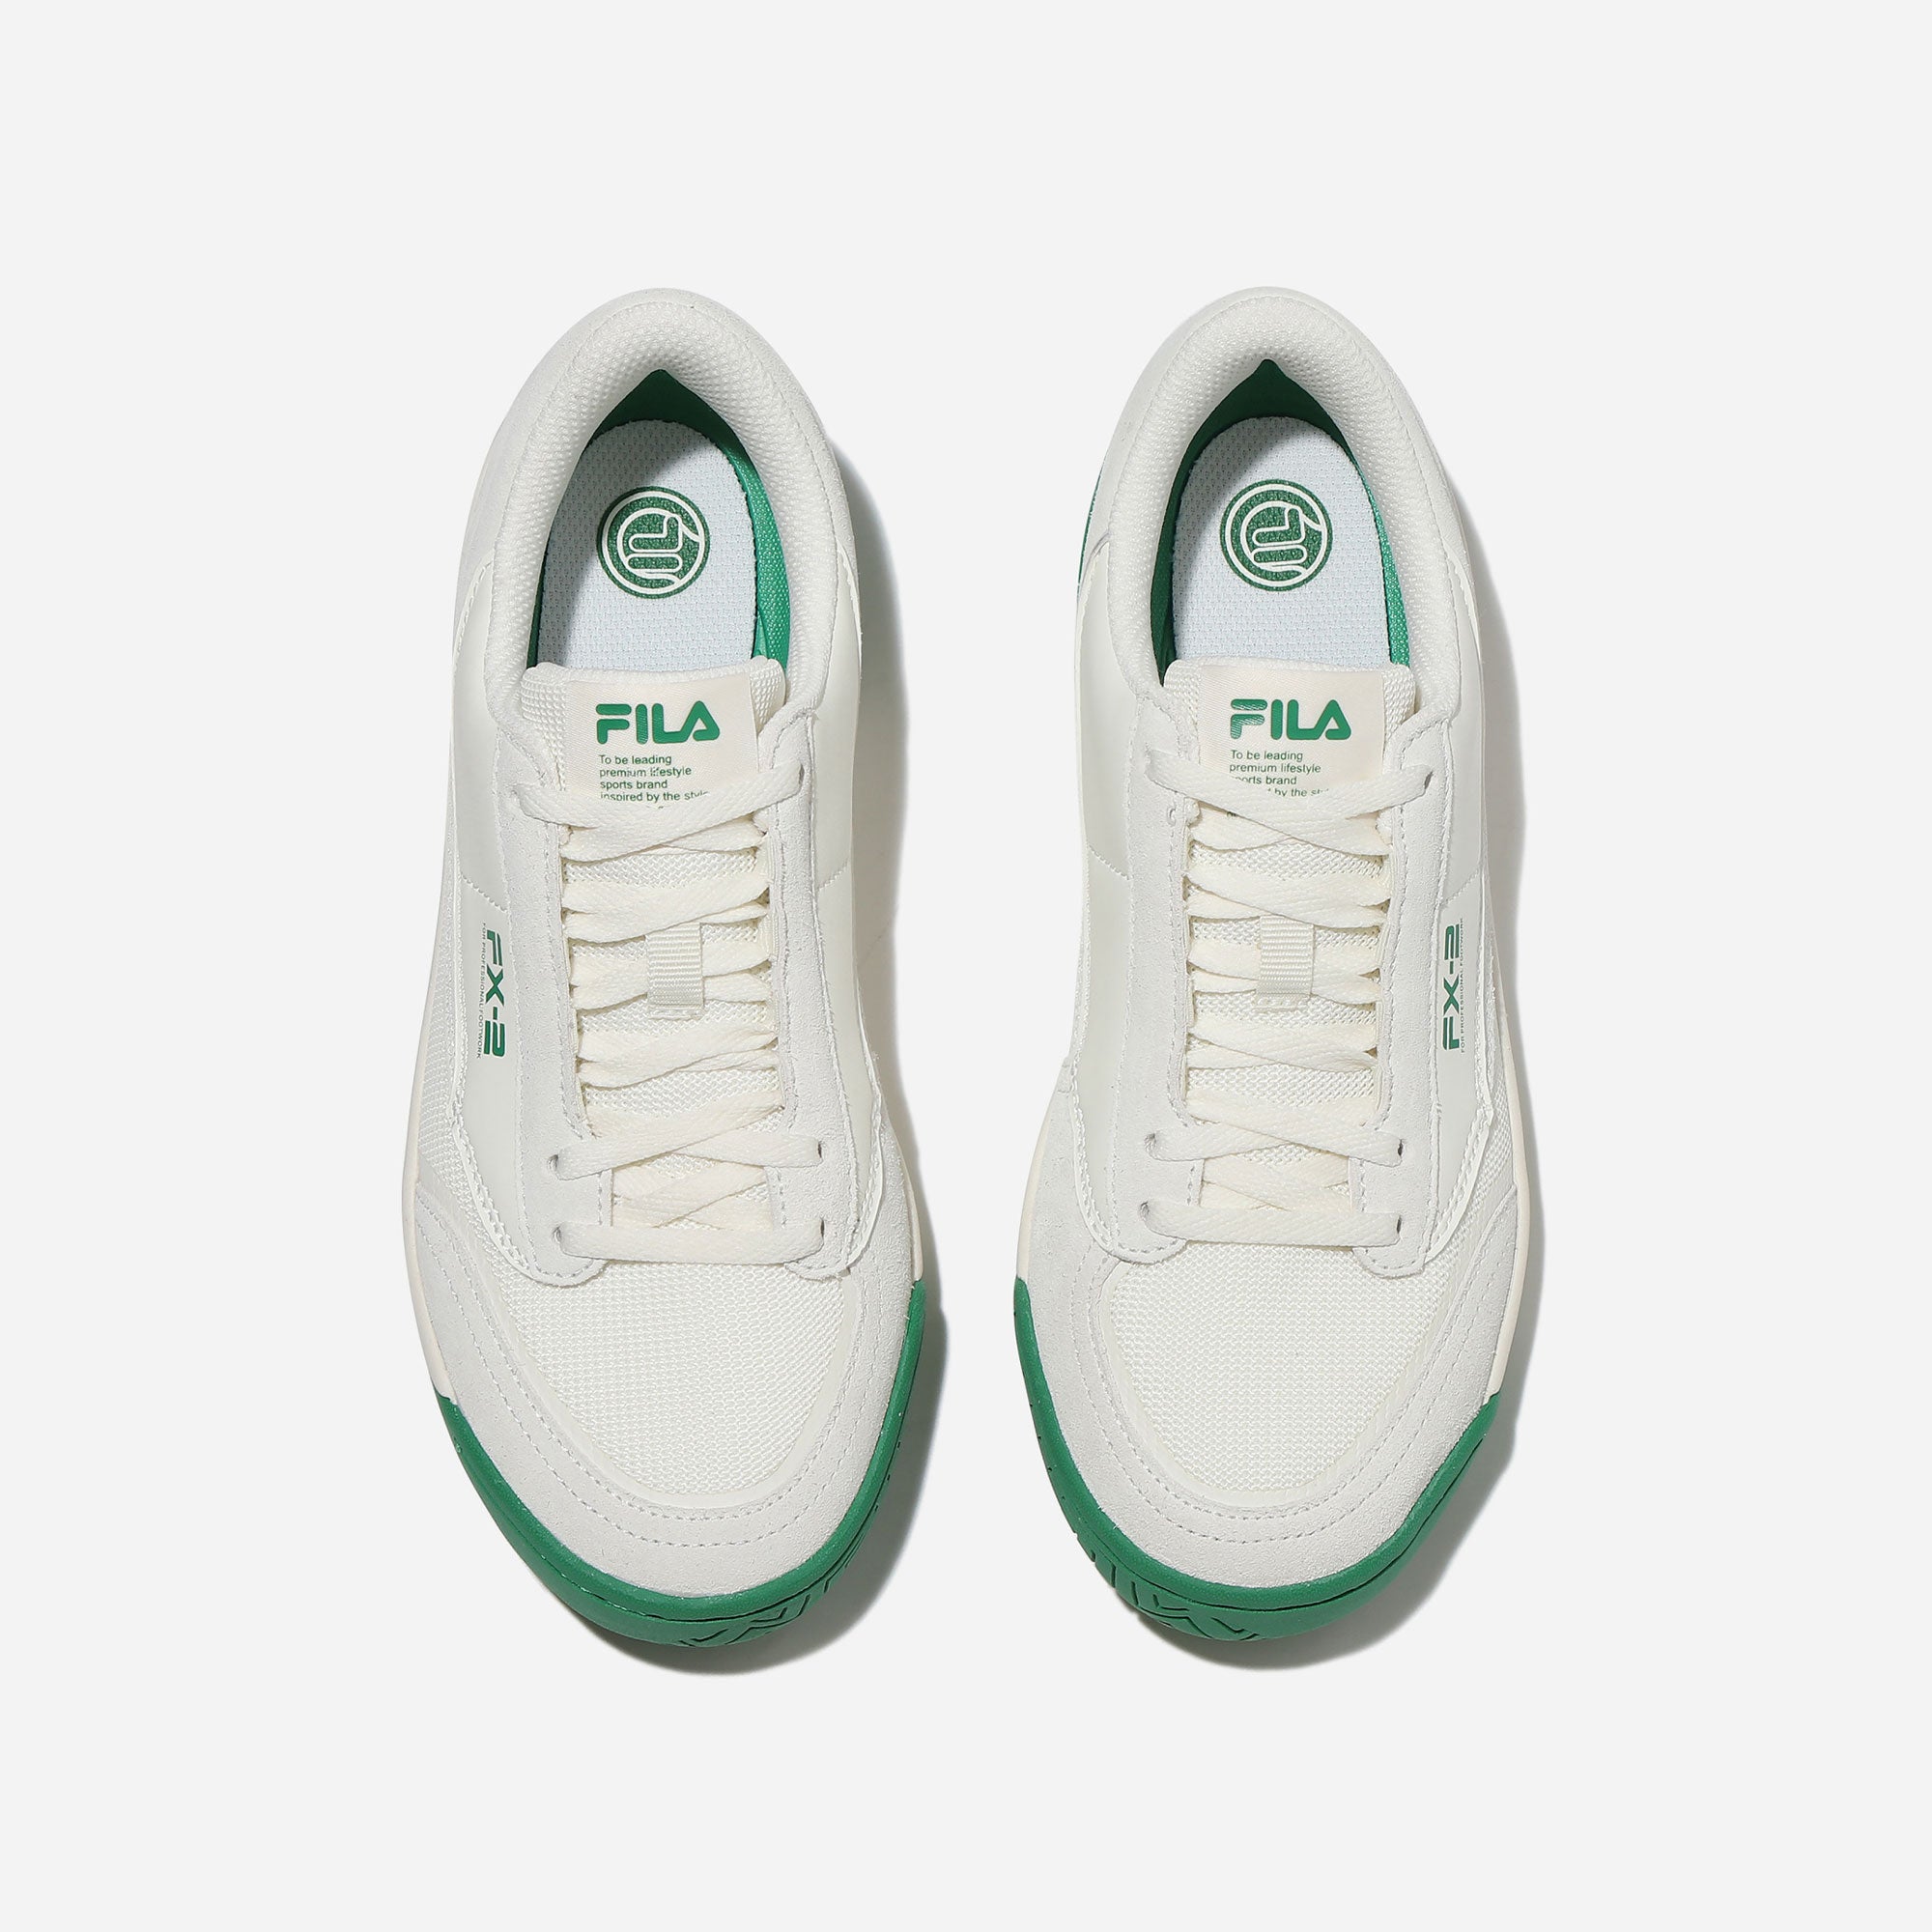 Giày Thời Trang Unisex Fila O.T Authentic T5 - Supersports Vietnam